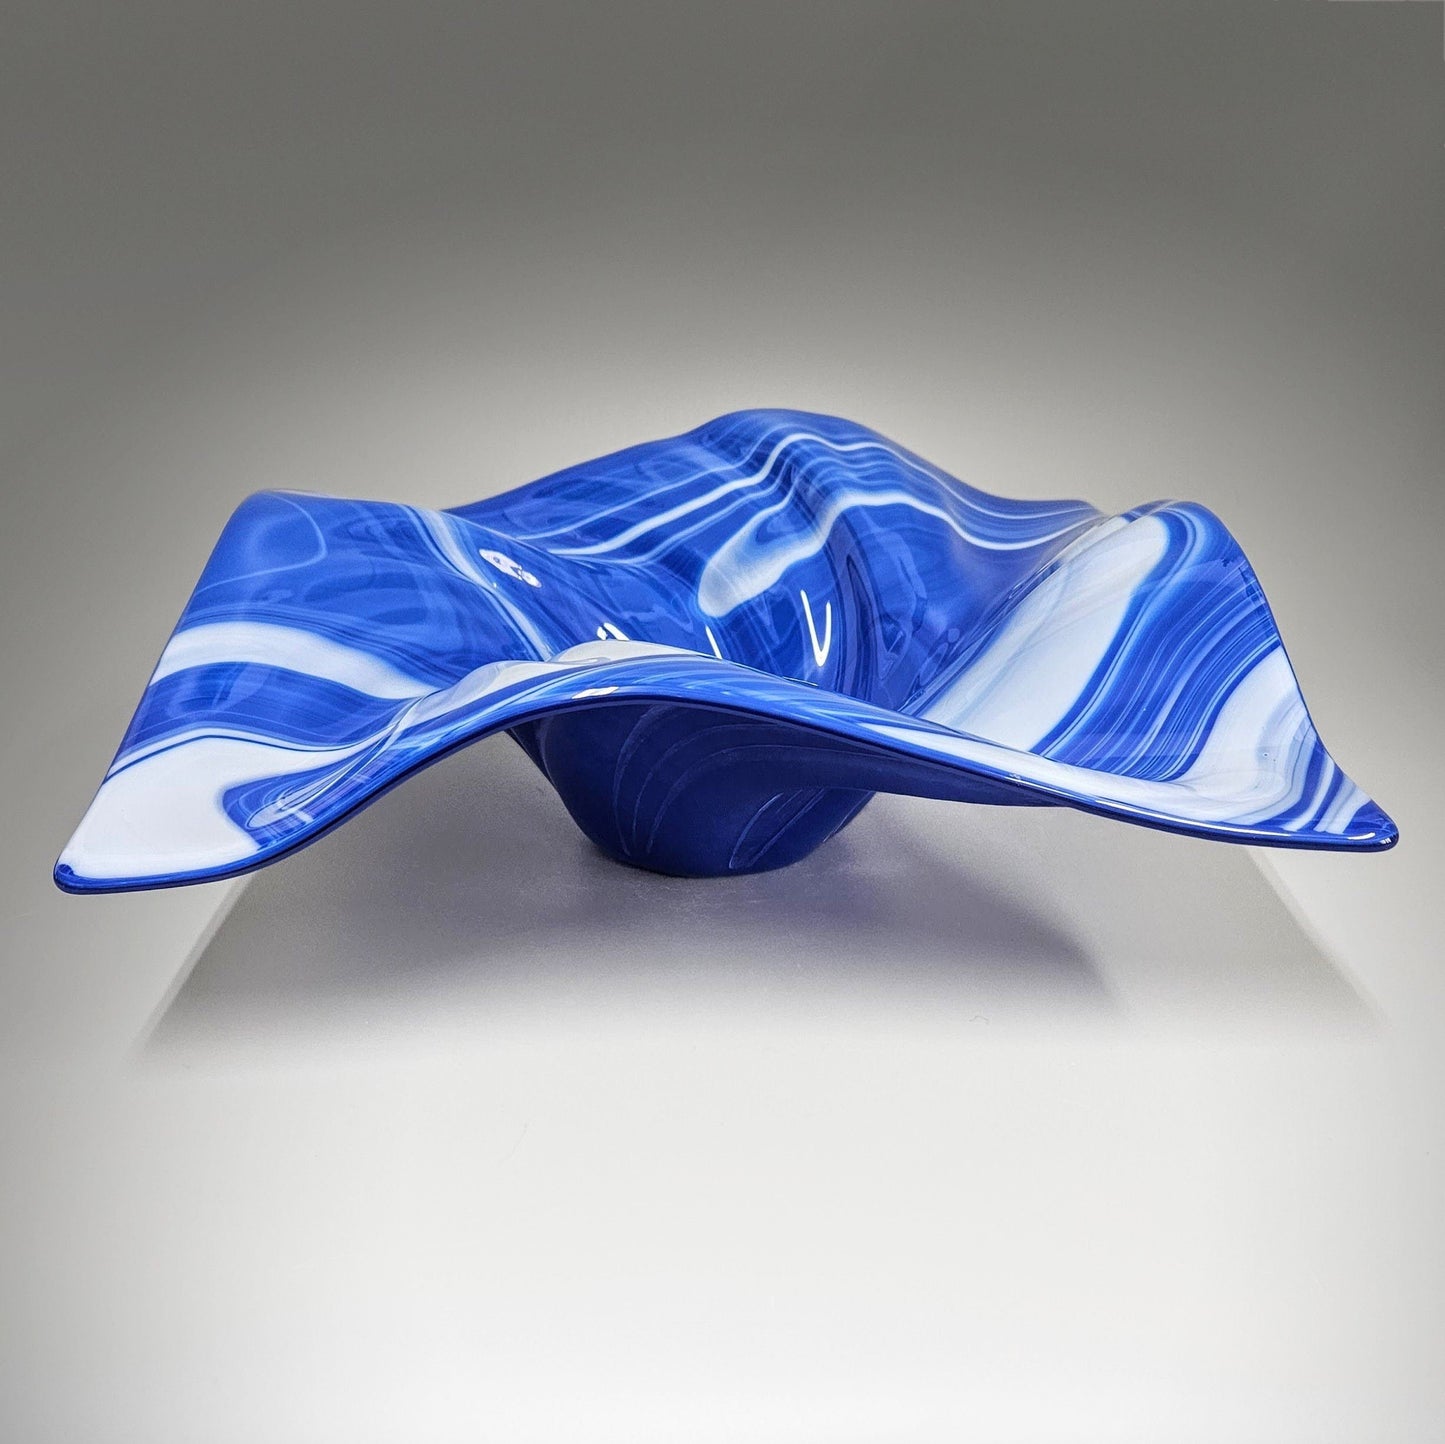 Glass Art Wave Bowl in Royal Blue and White